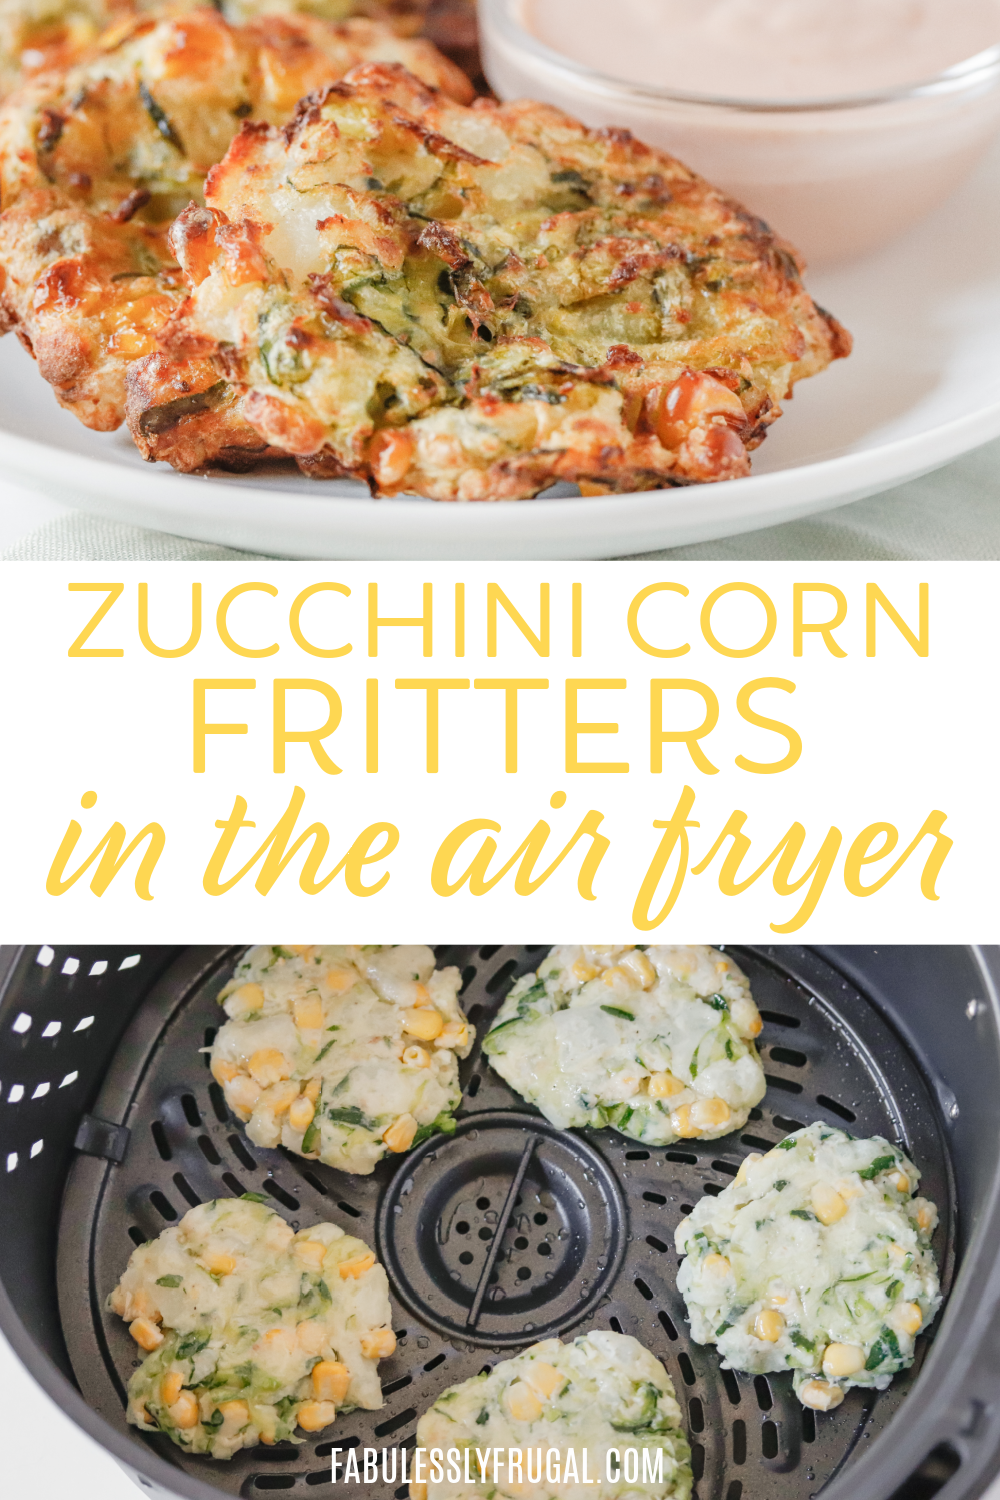 Make zucchini corn fritters in the air fryer in just 5 minutes